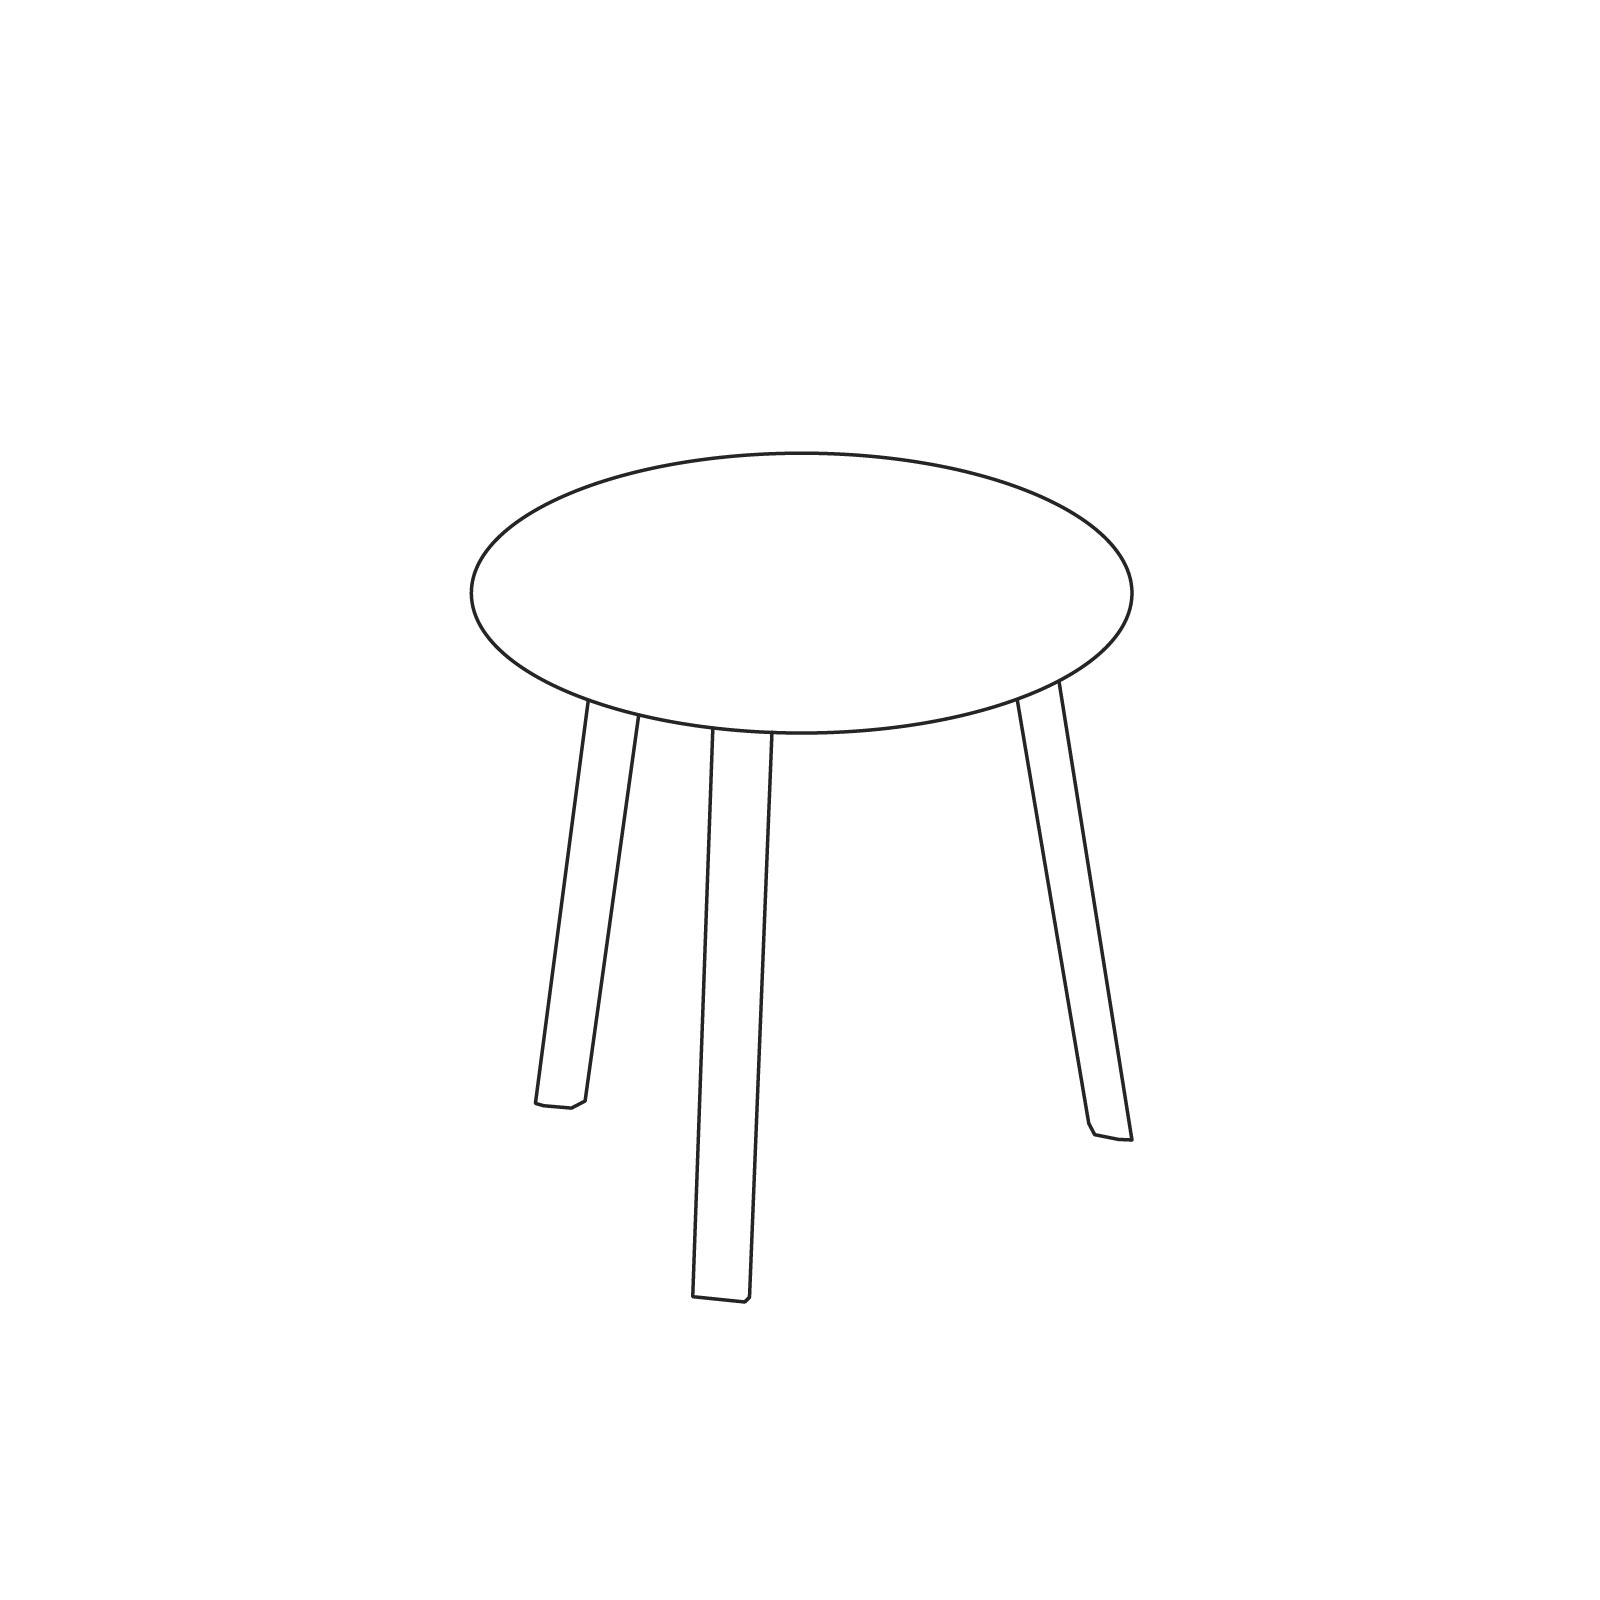 A line drawing of Bella Side Table–High.